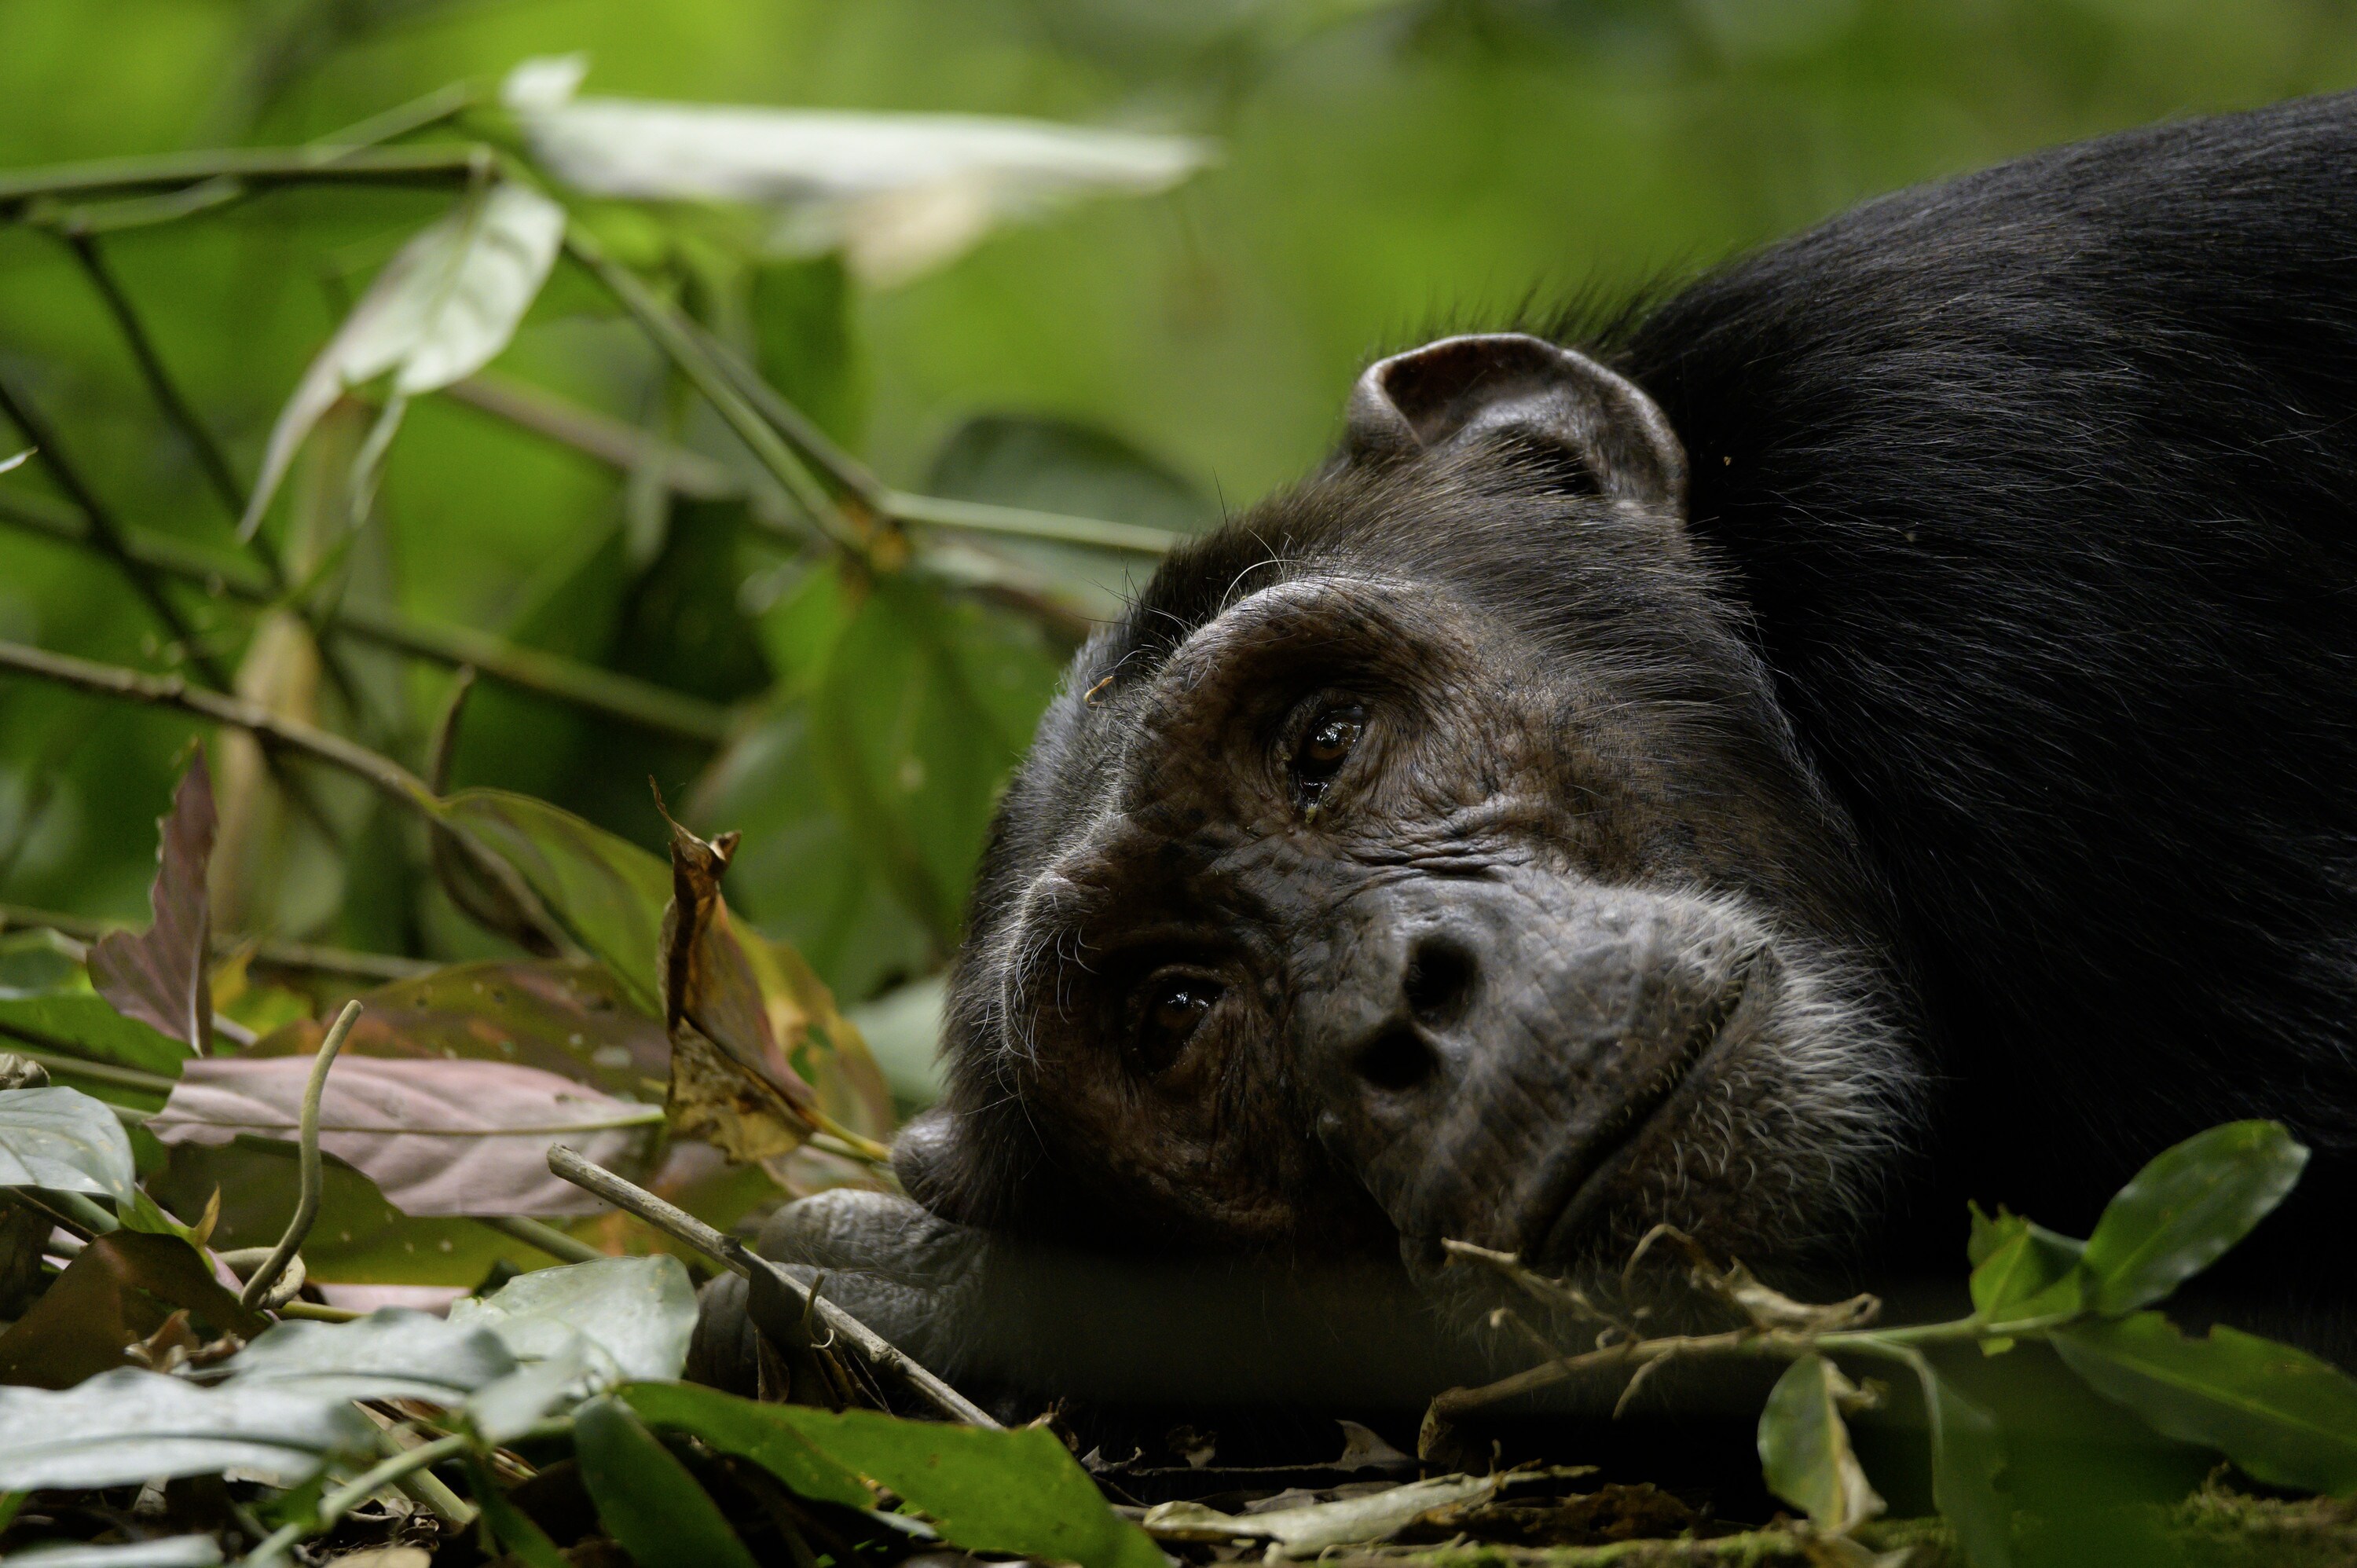 An adult chimp lying on the ground. (National Geographic for Disney+/Dominic Weston)